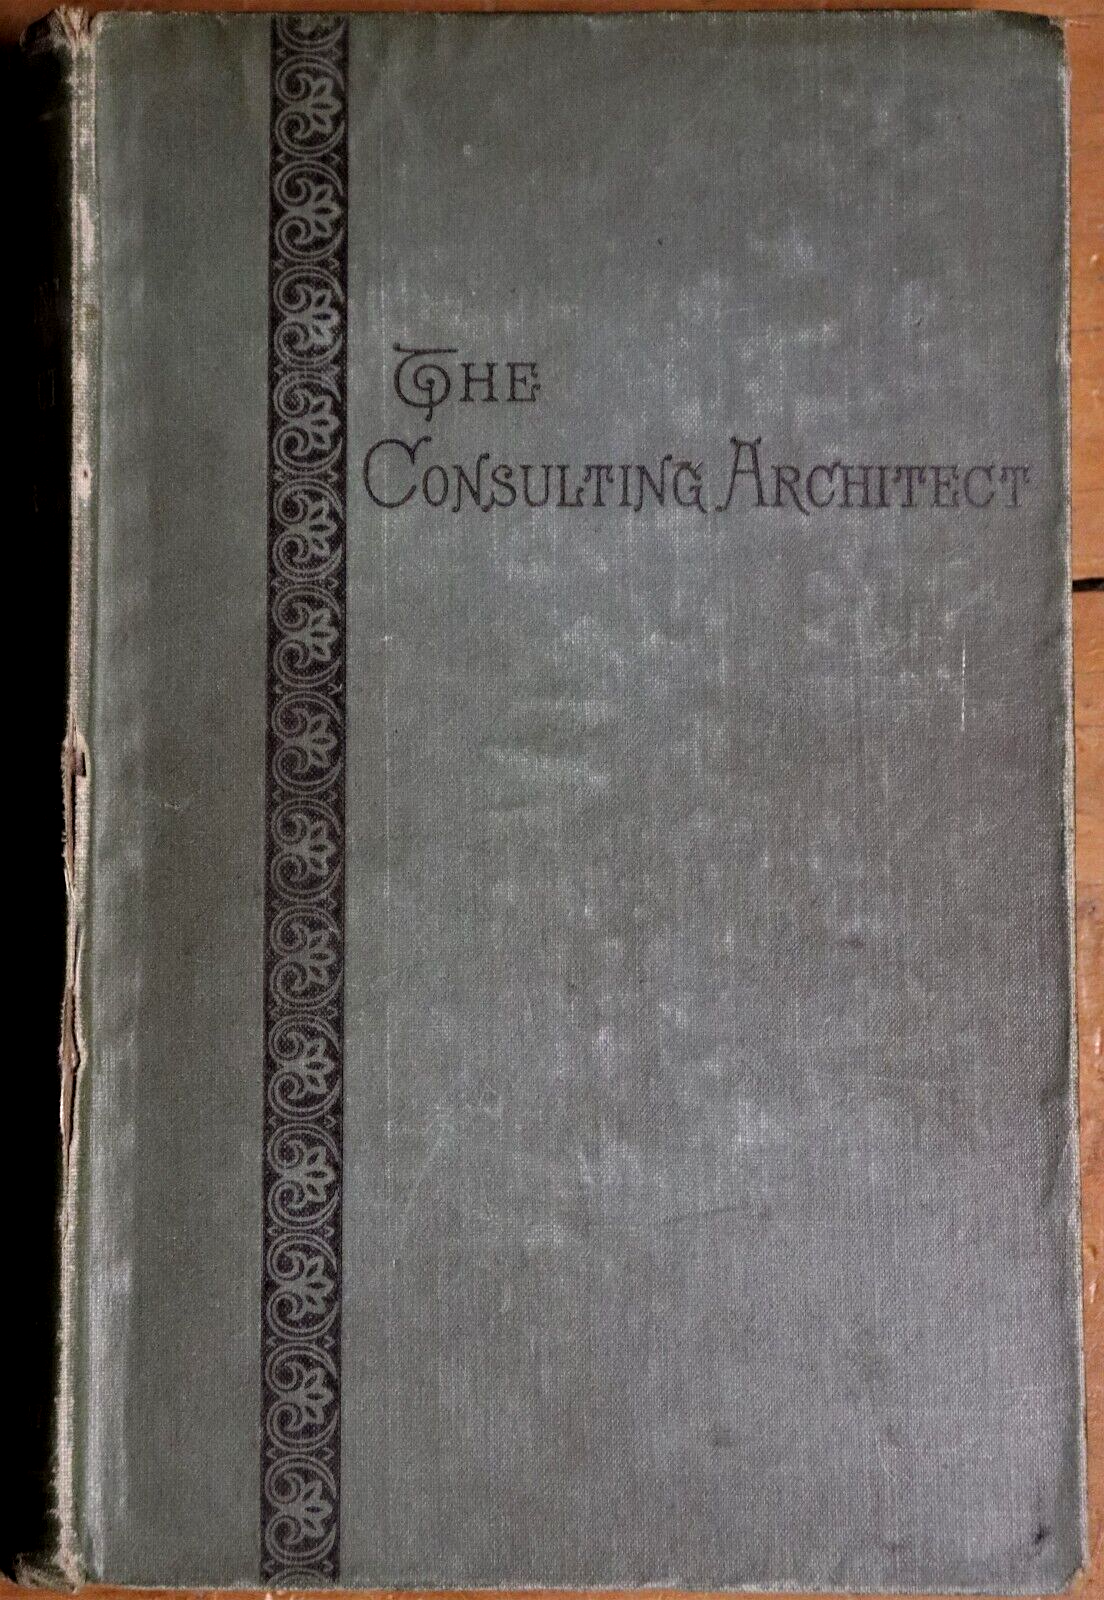 1886 The Consulting Architect by Robert Kerr Antiquarian Architecture Book